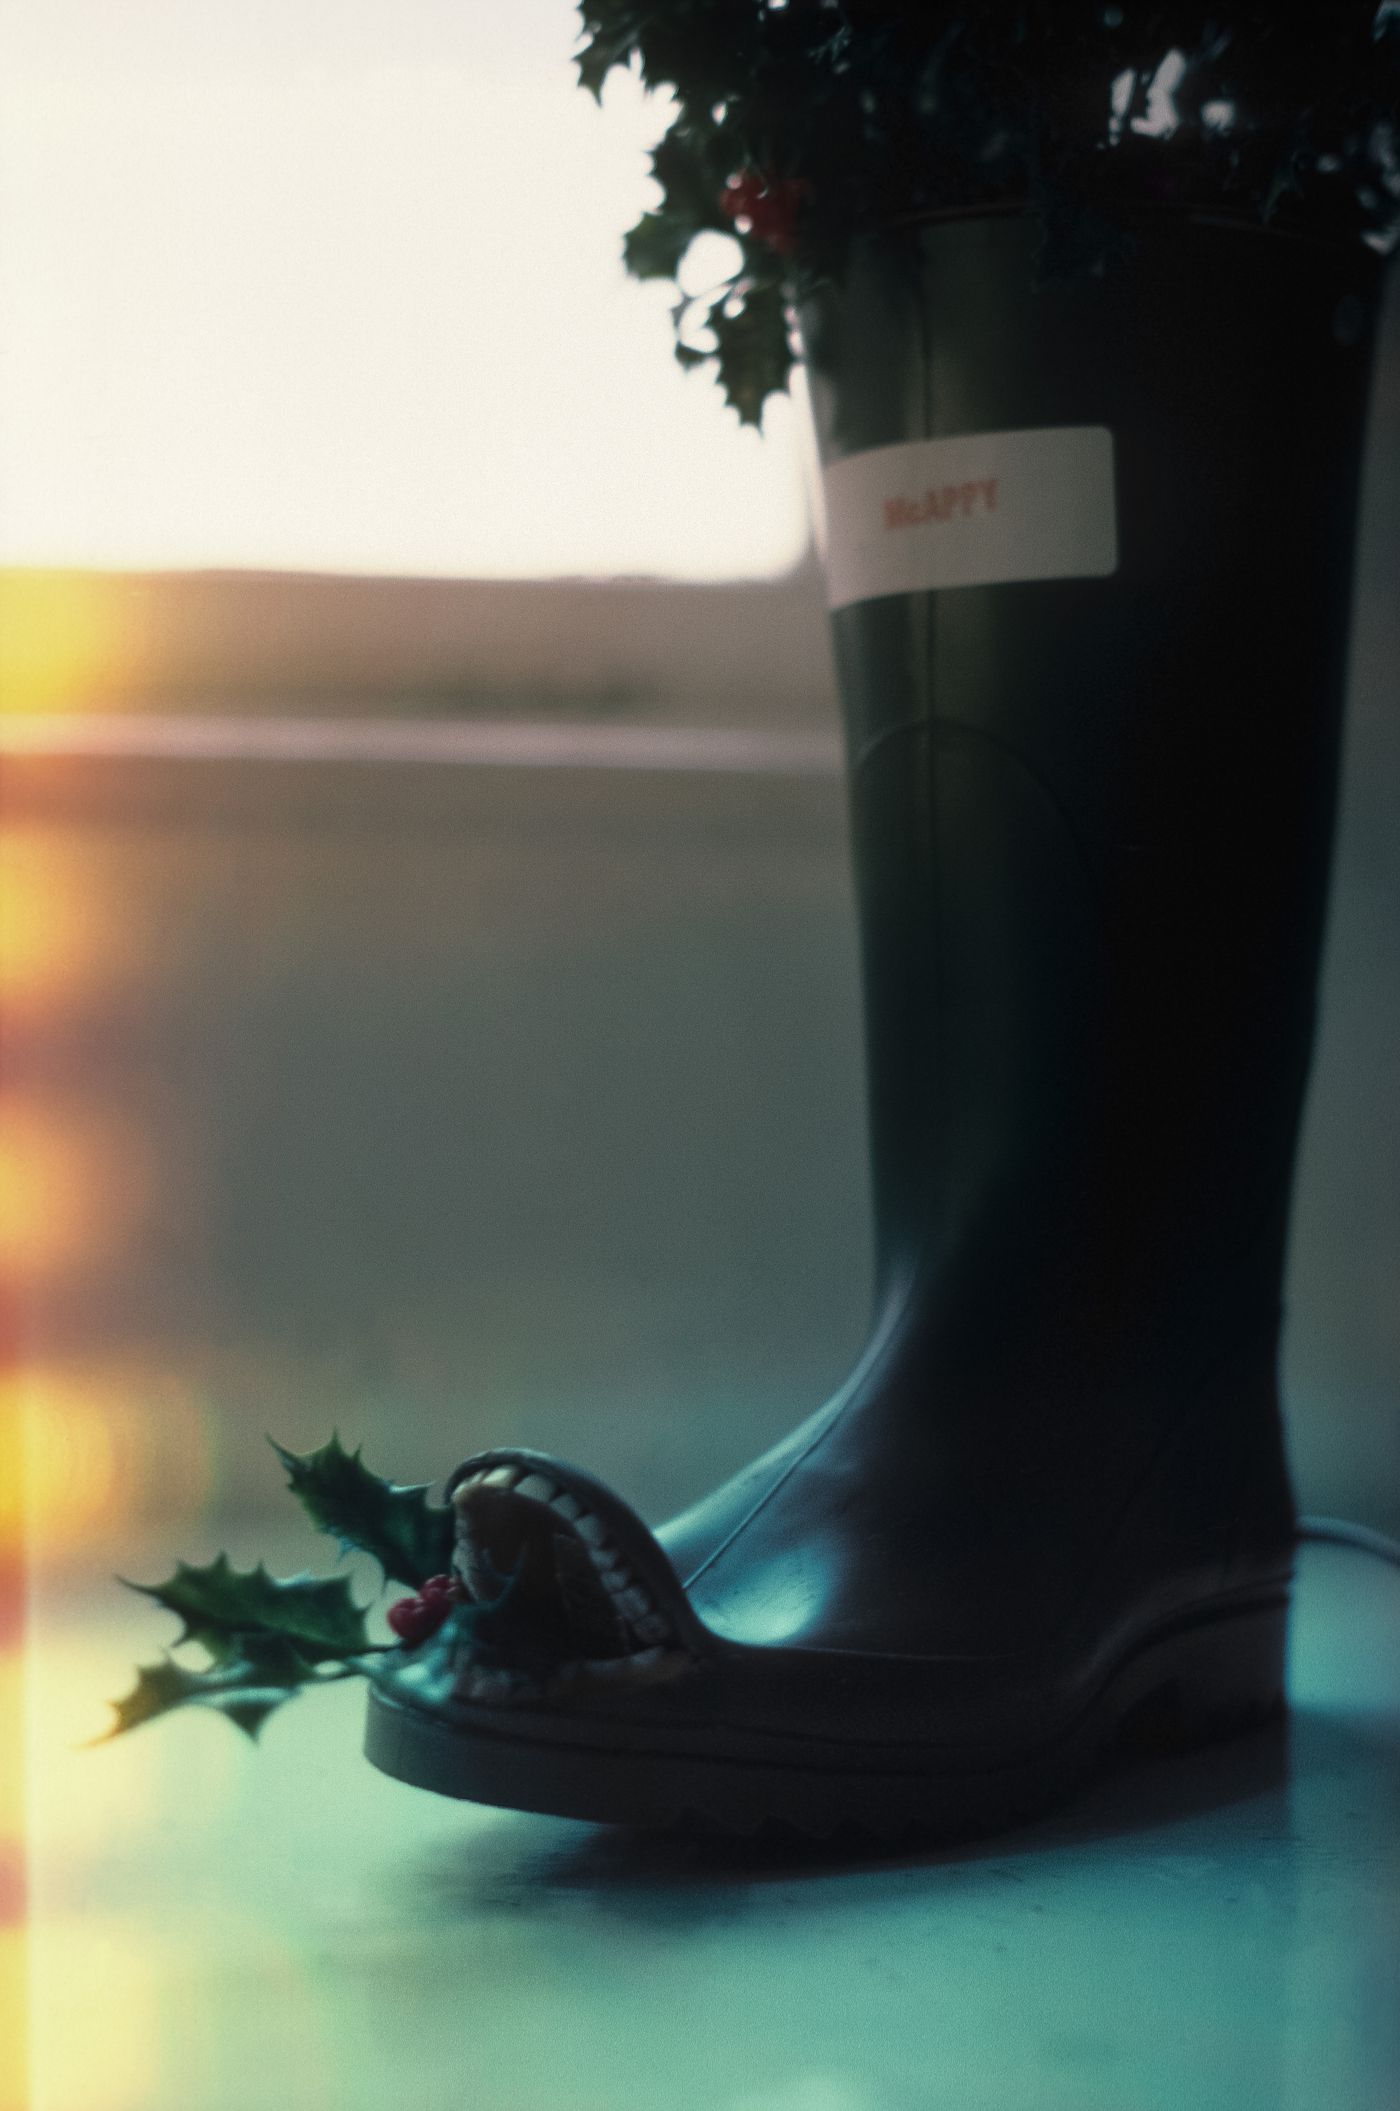 View of modified rubber boot with holiday decorations (from the McAppy project series)